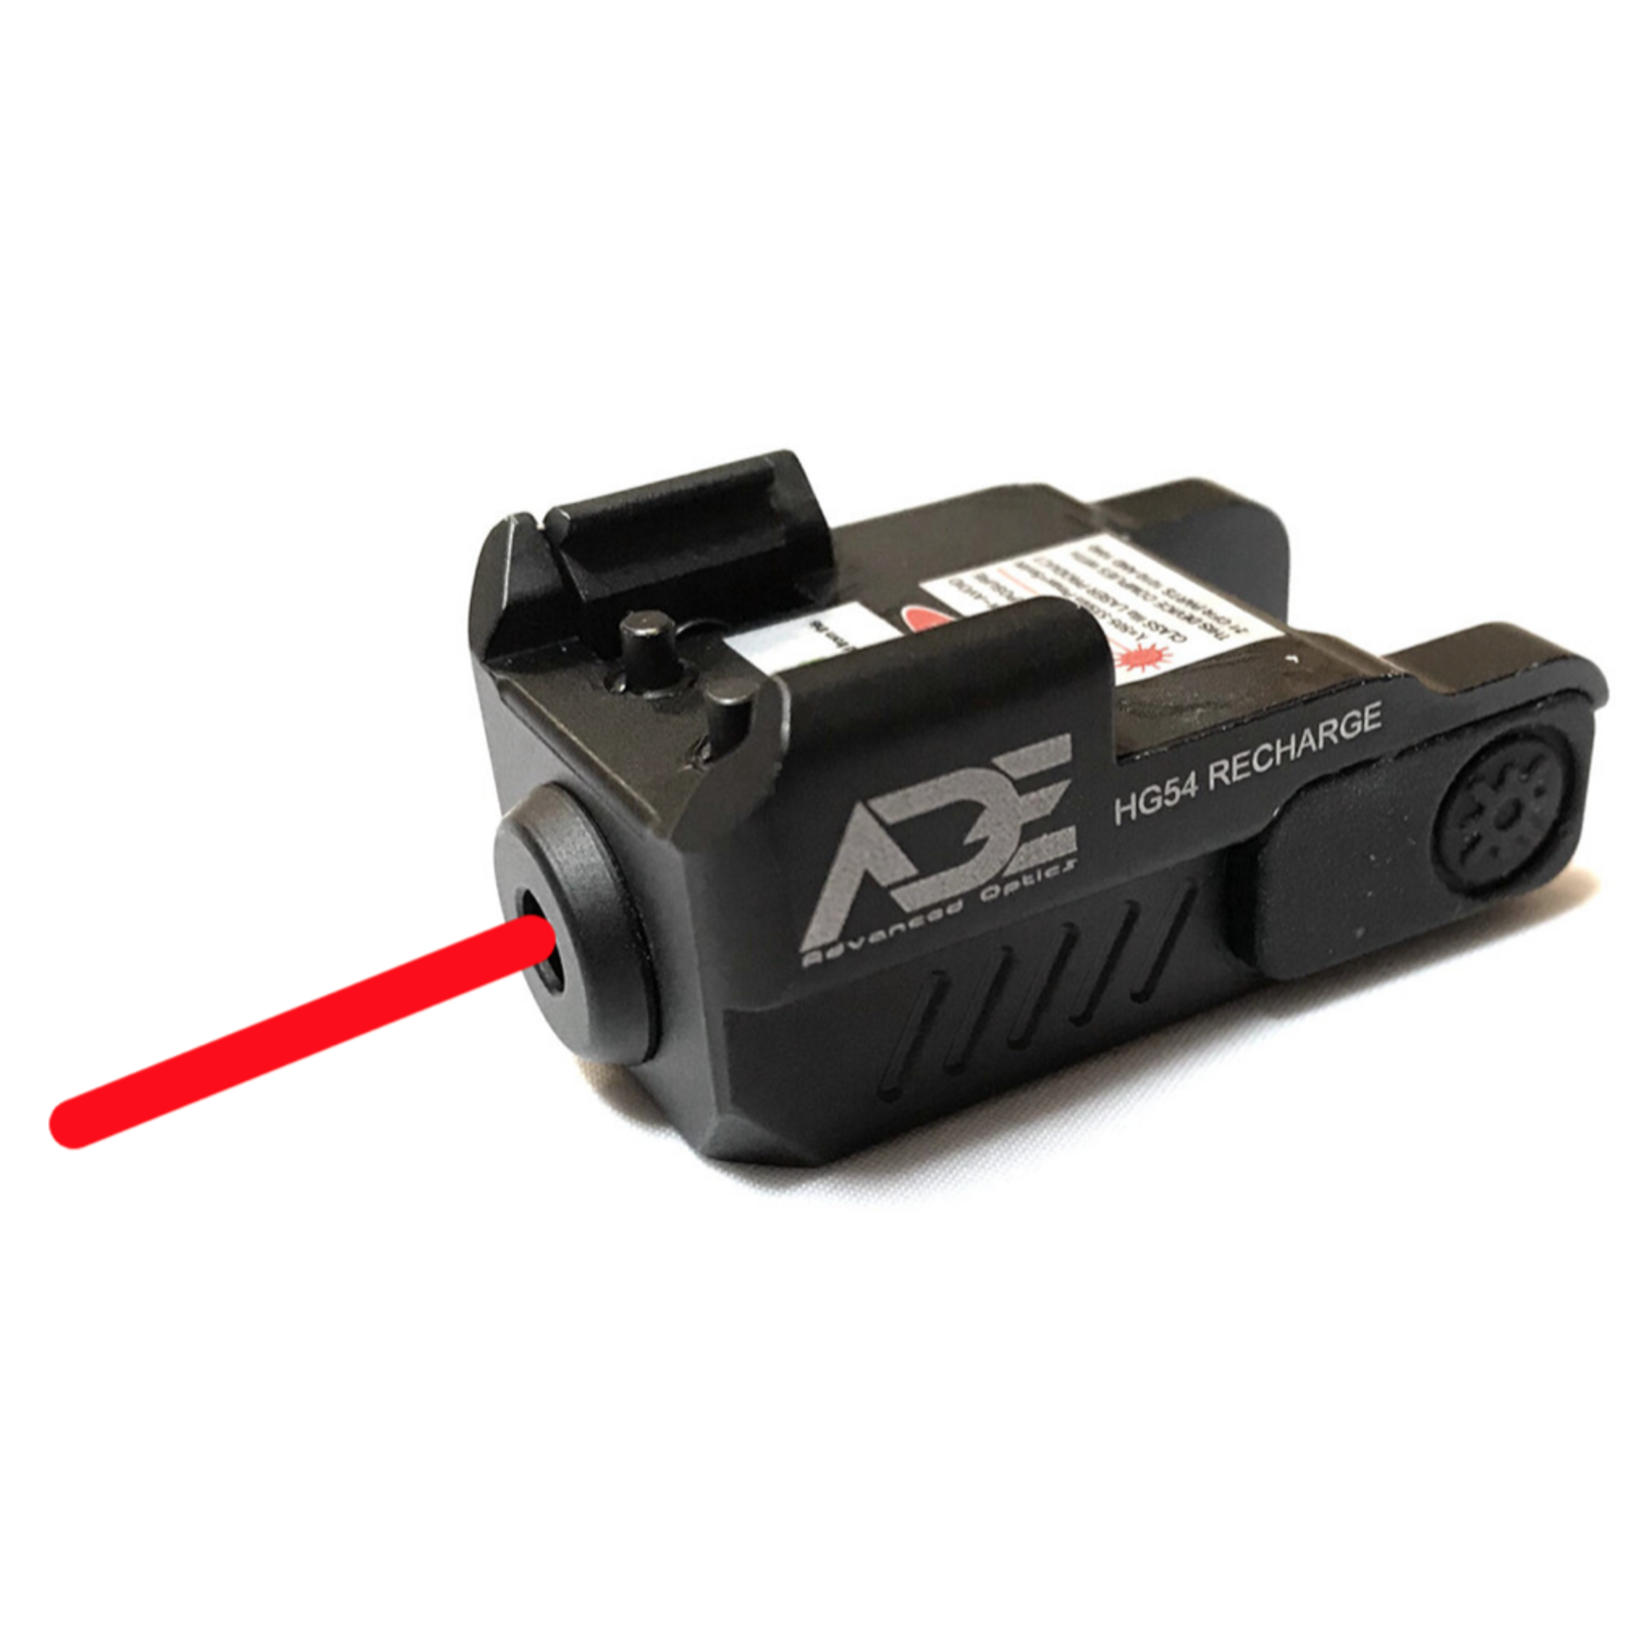 ADE Advanced Optics ADE HR54 - RECHARGE Super Compact RED laser Sight w/Strobe